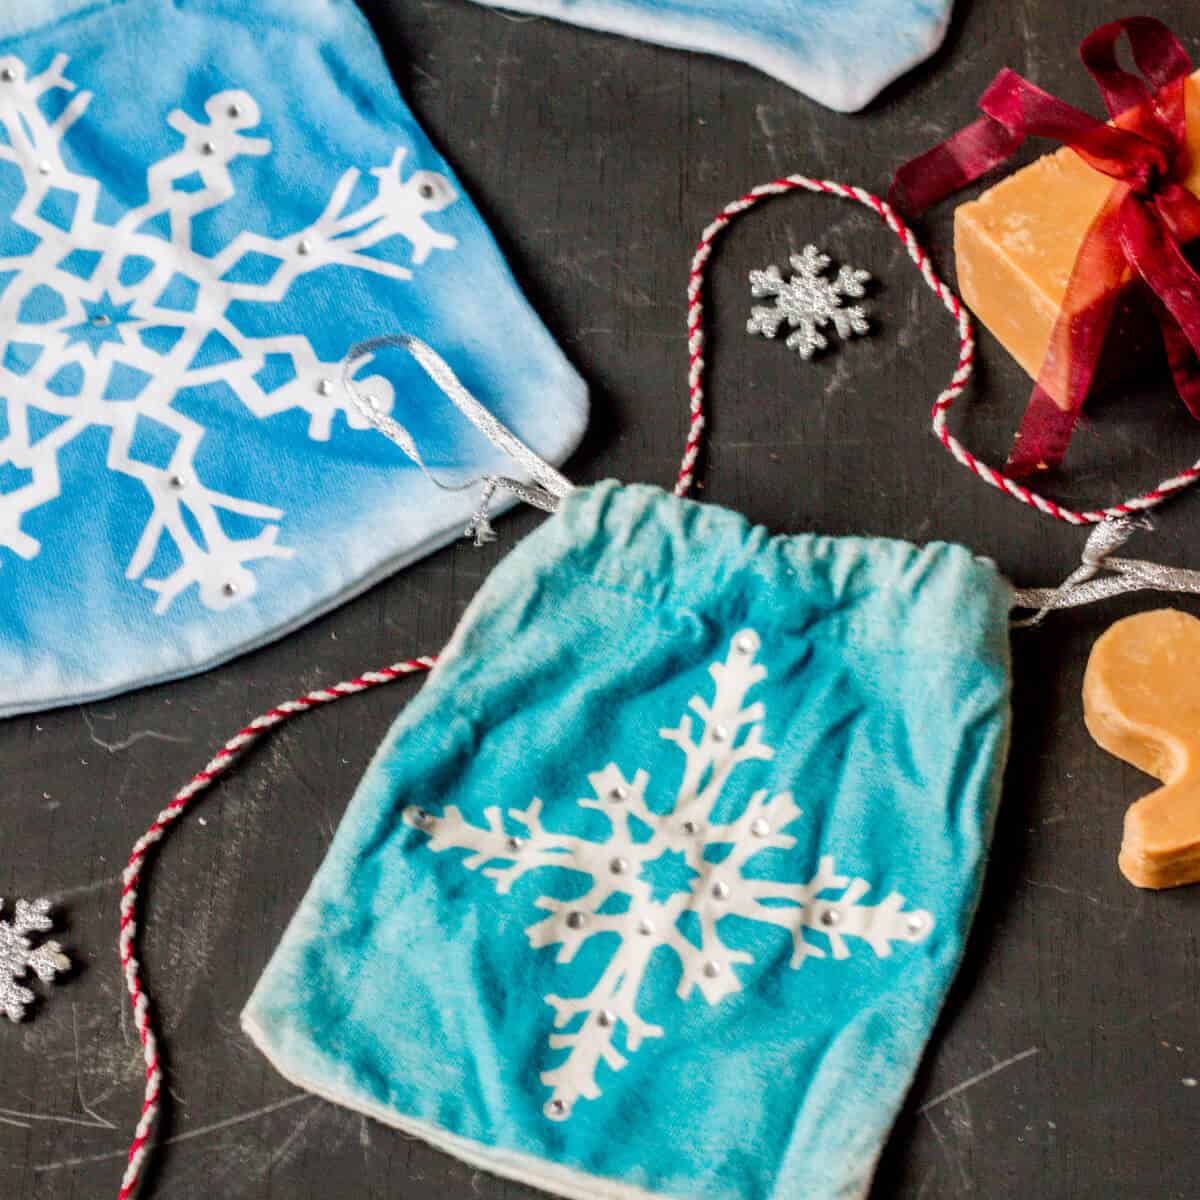 Two homemade blue cloth gift pouches with painted snowflakes designs and embellished with rhinestones.